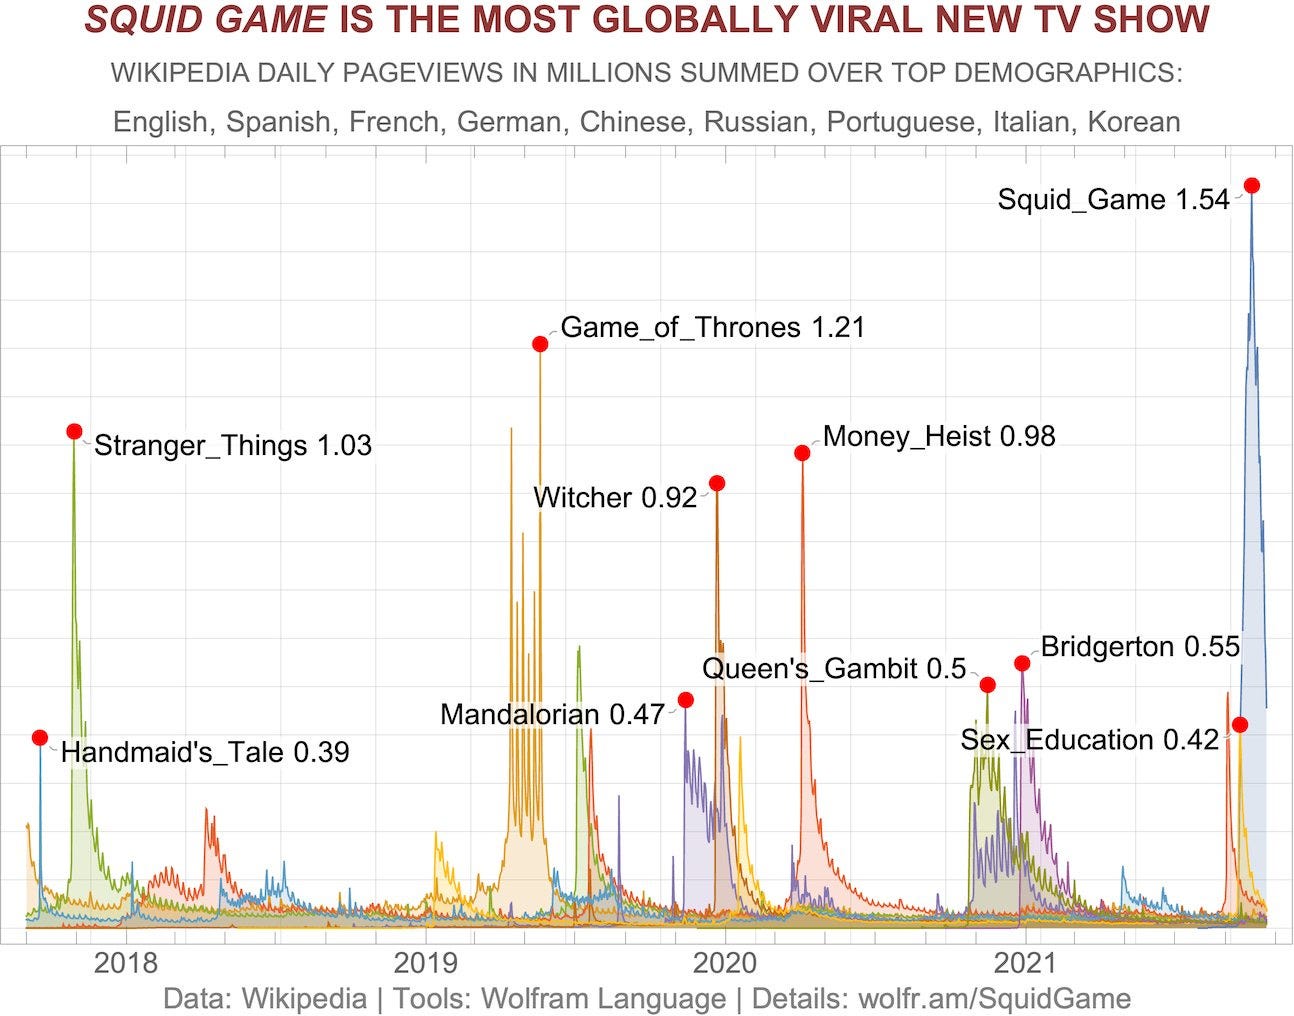 Can you spot other $NFLX hits amongst the world´s most viral shows?